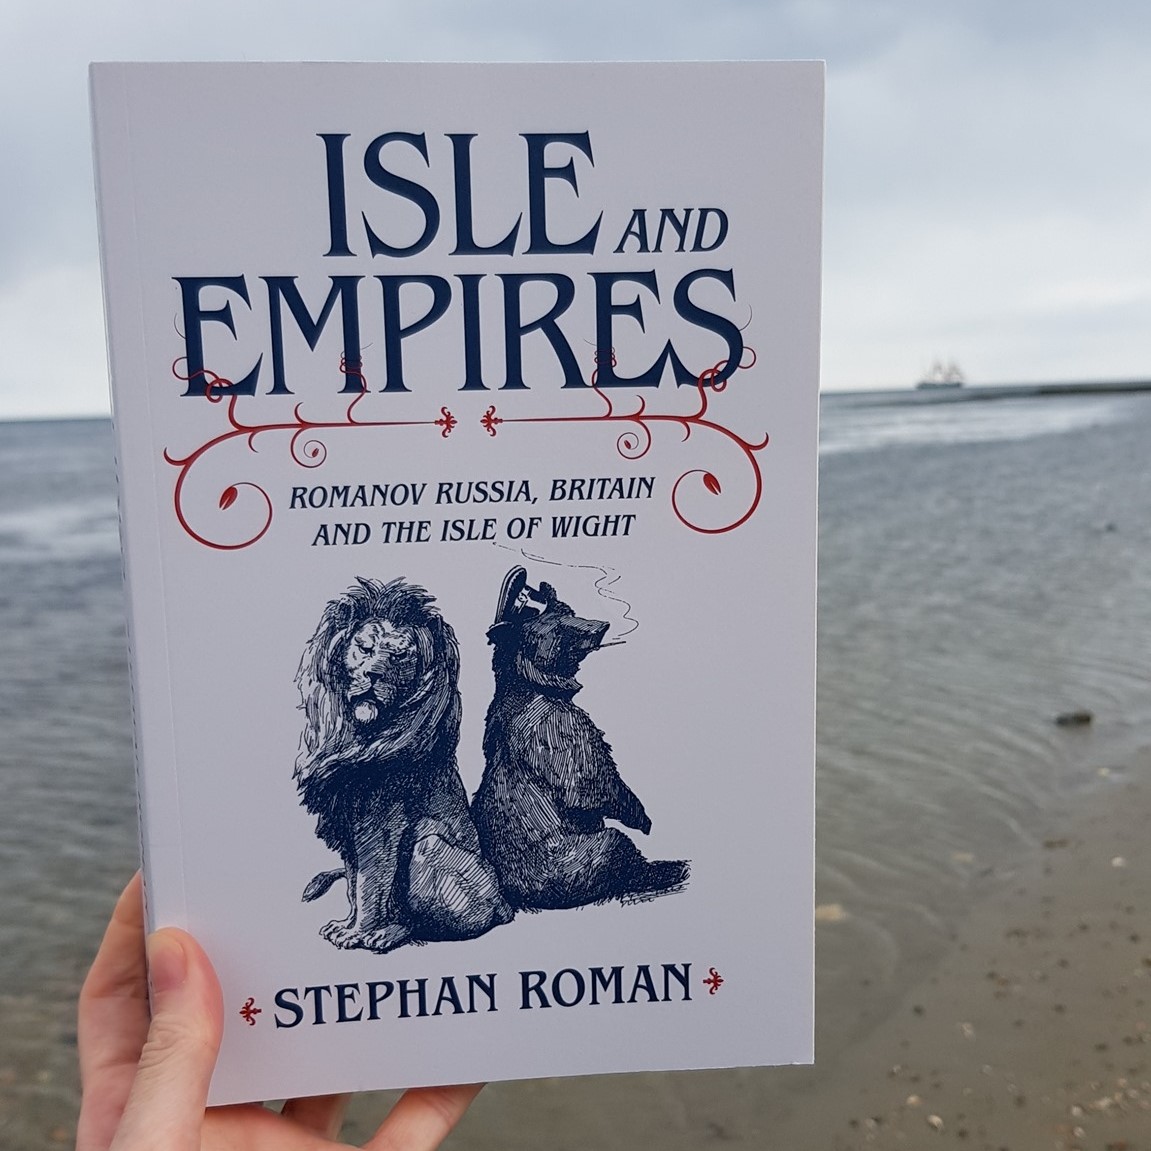 Isle and Empires